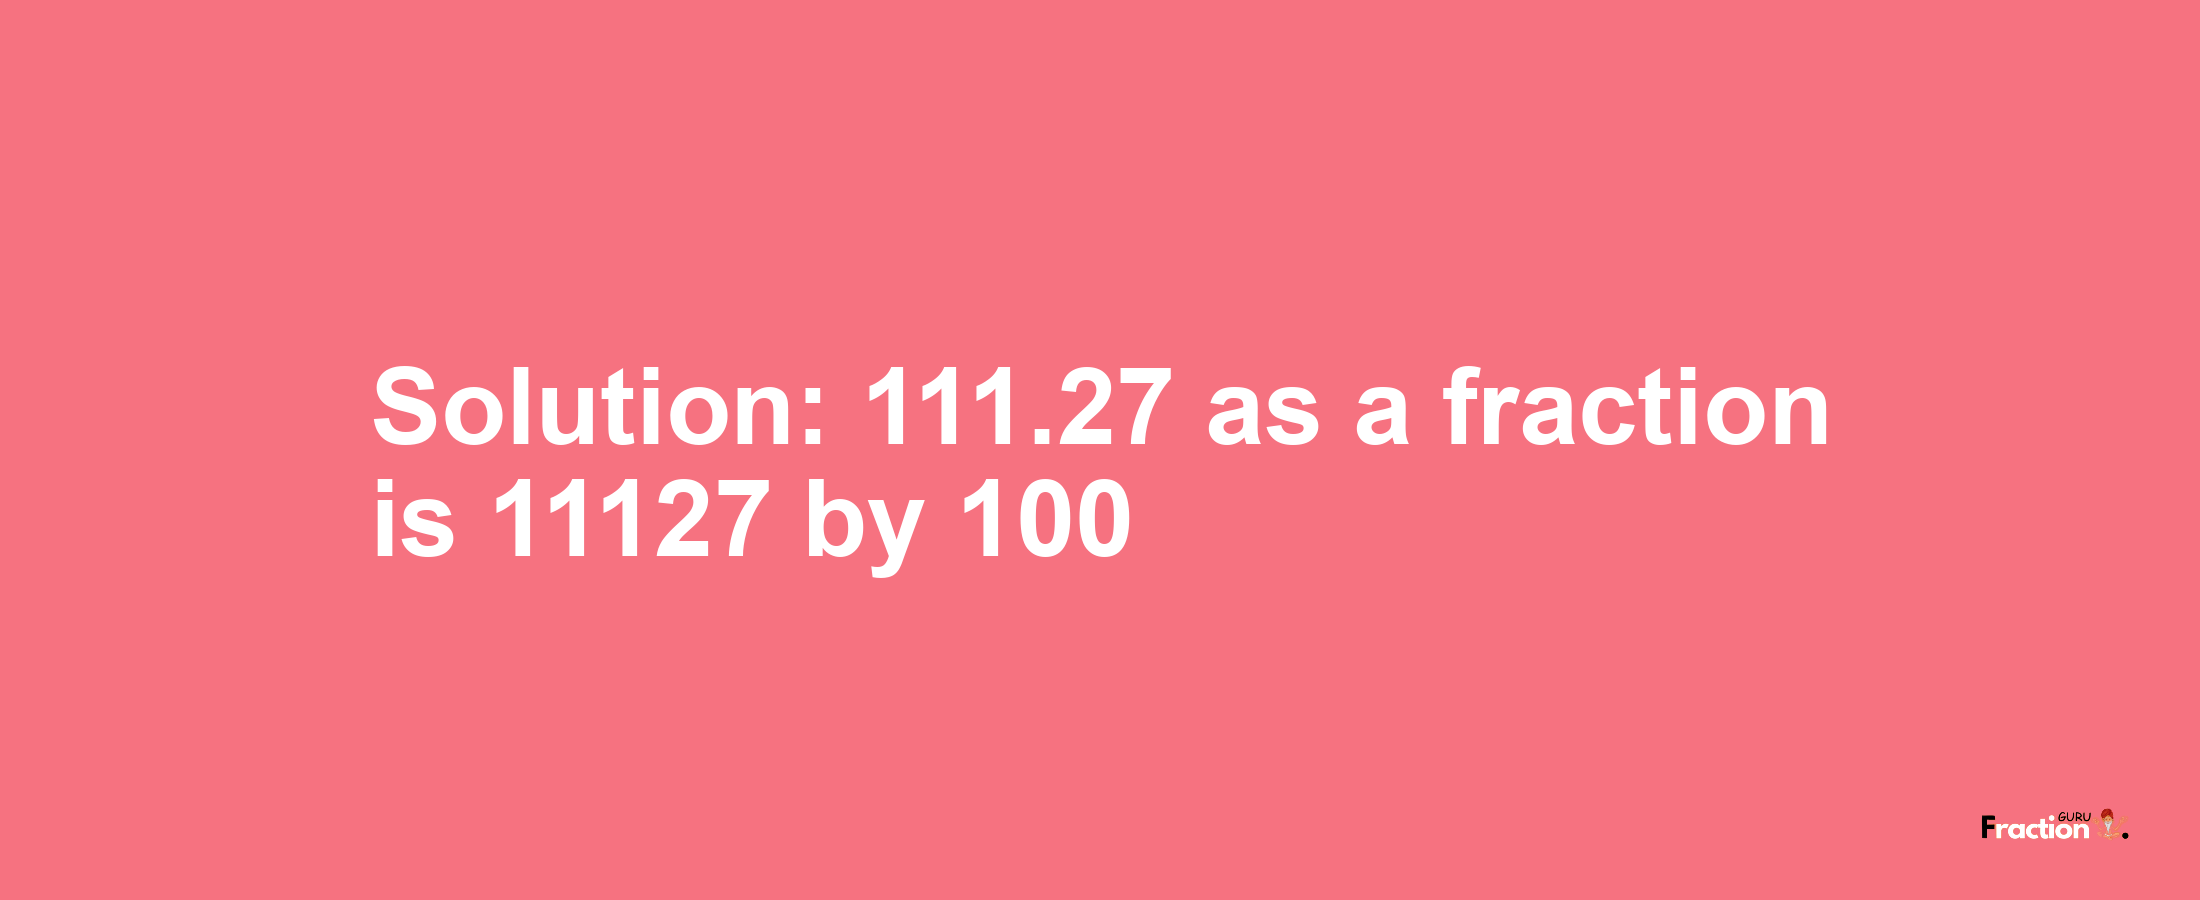 Solution:111.27 as a fraction is 11127/100